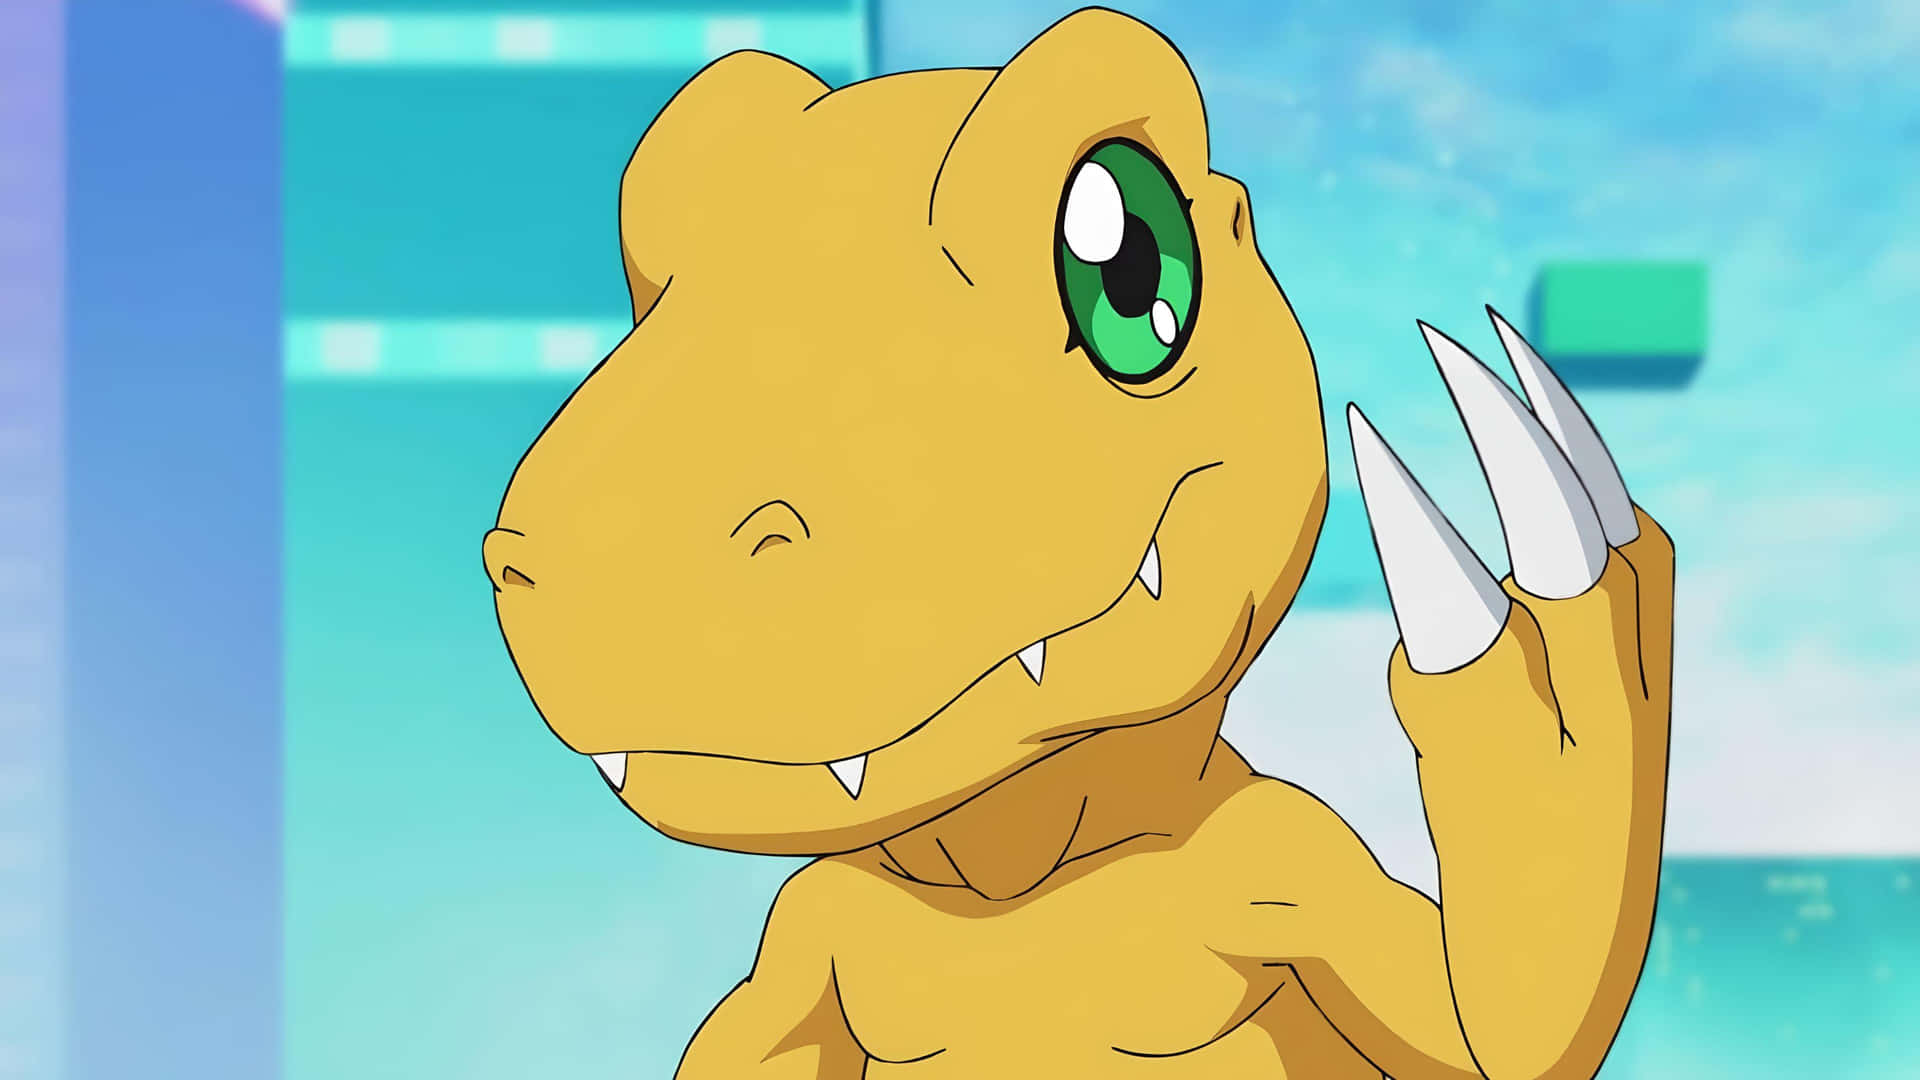 Agumon, Standing Proudly, Fills Digimon Fans' Hearts With Excitement. Wallpaper